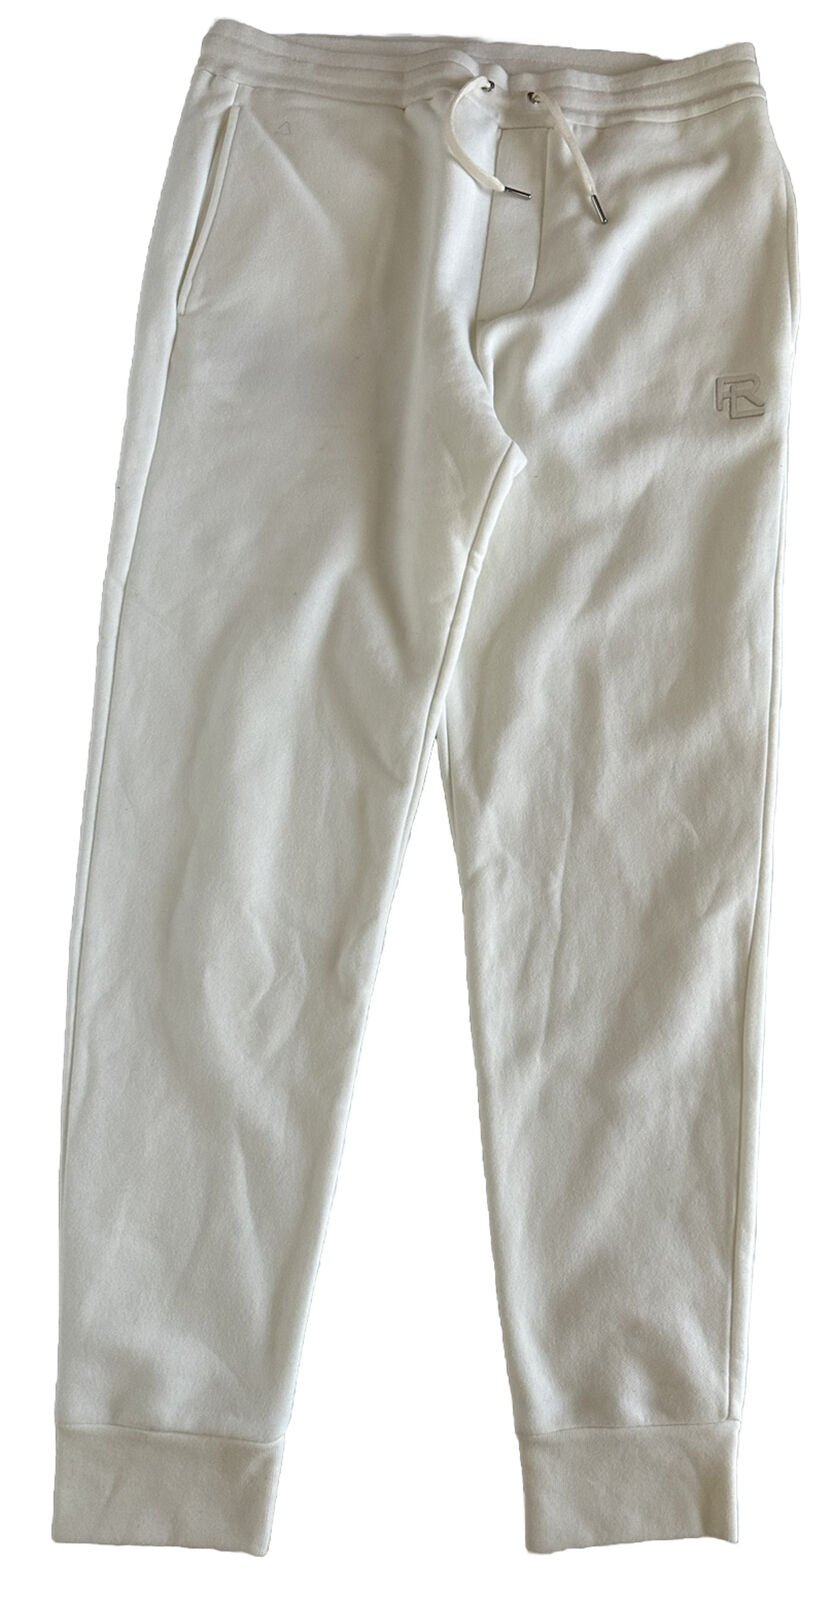 NWT $695 Ralph Lauren Purple Label Casual White Pants Medium Made in Italy